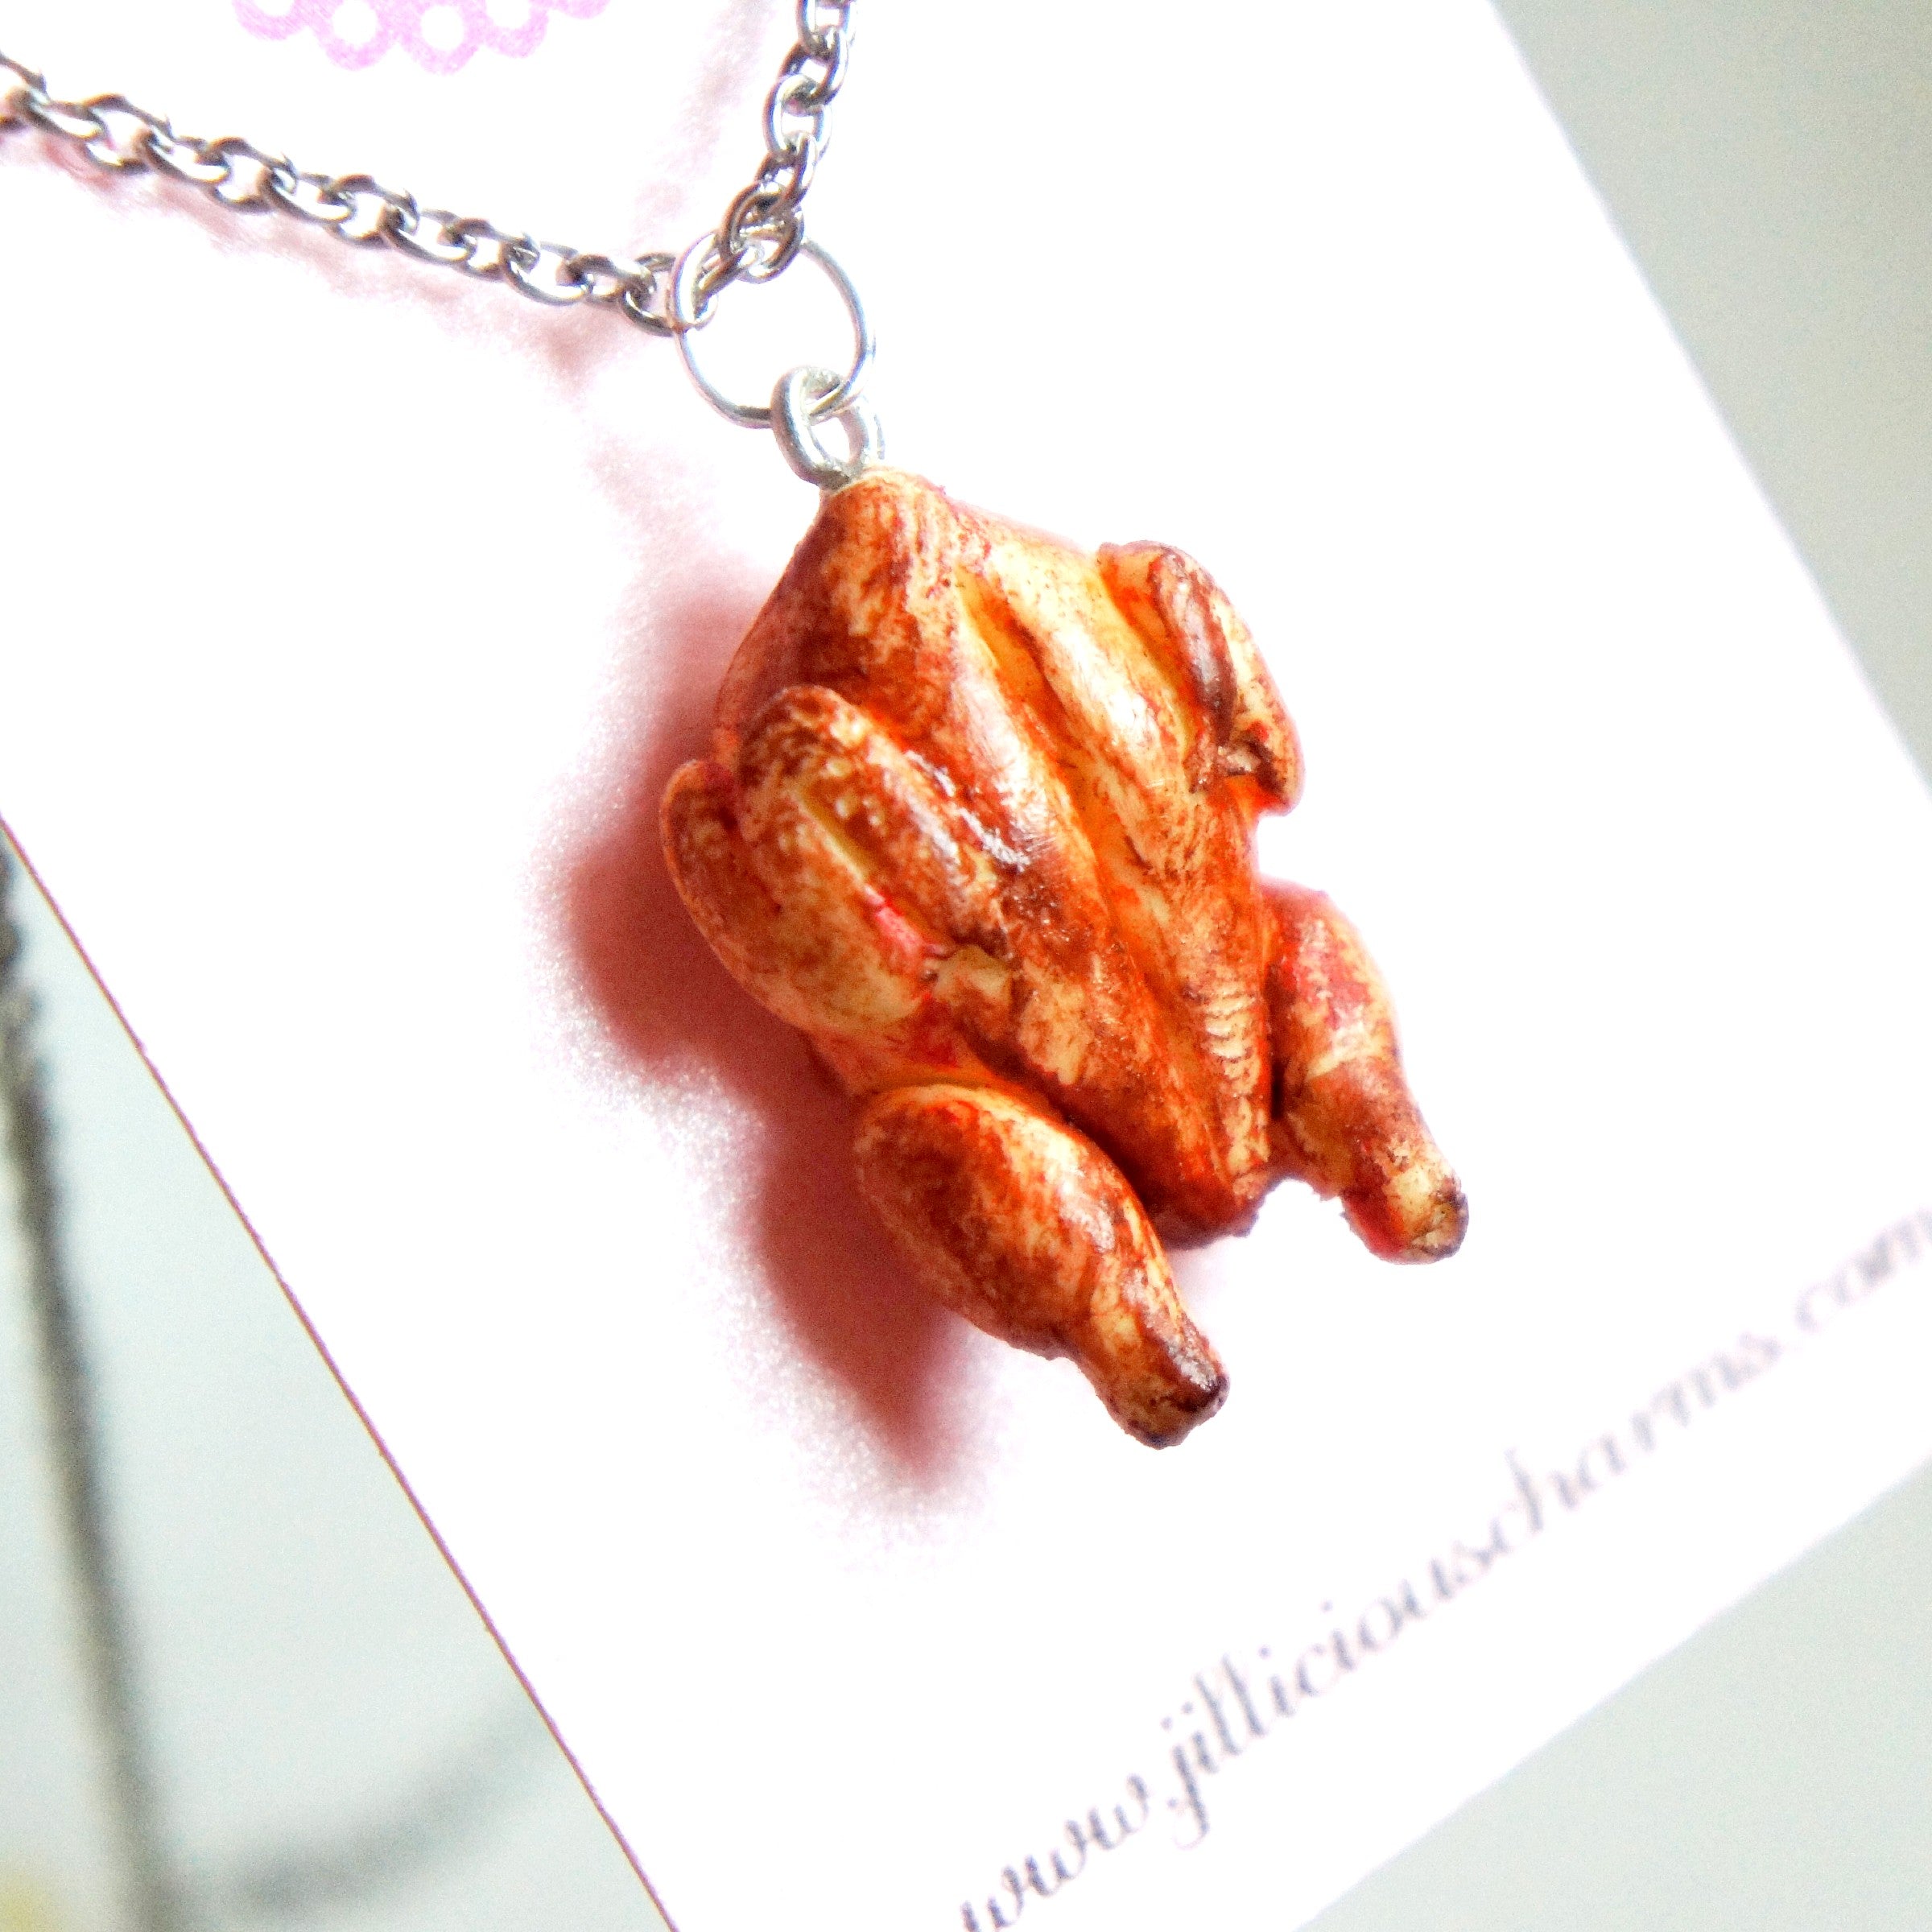 Roasted Turkey Necklace - Jillicious charms and accessories